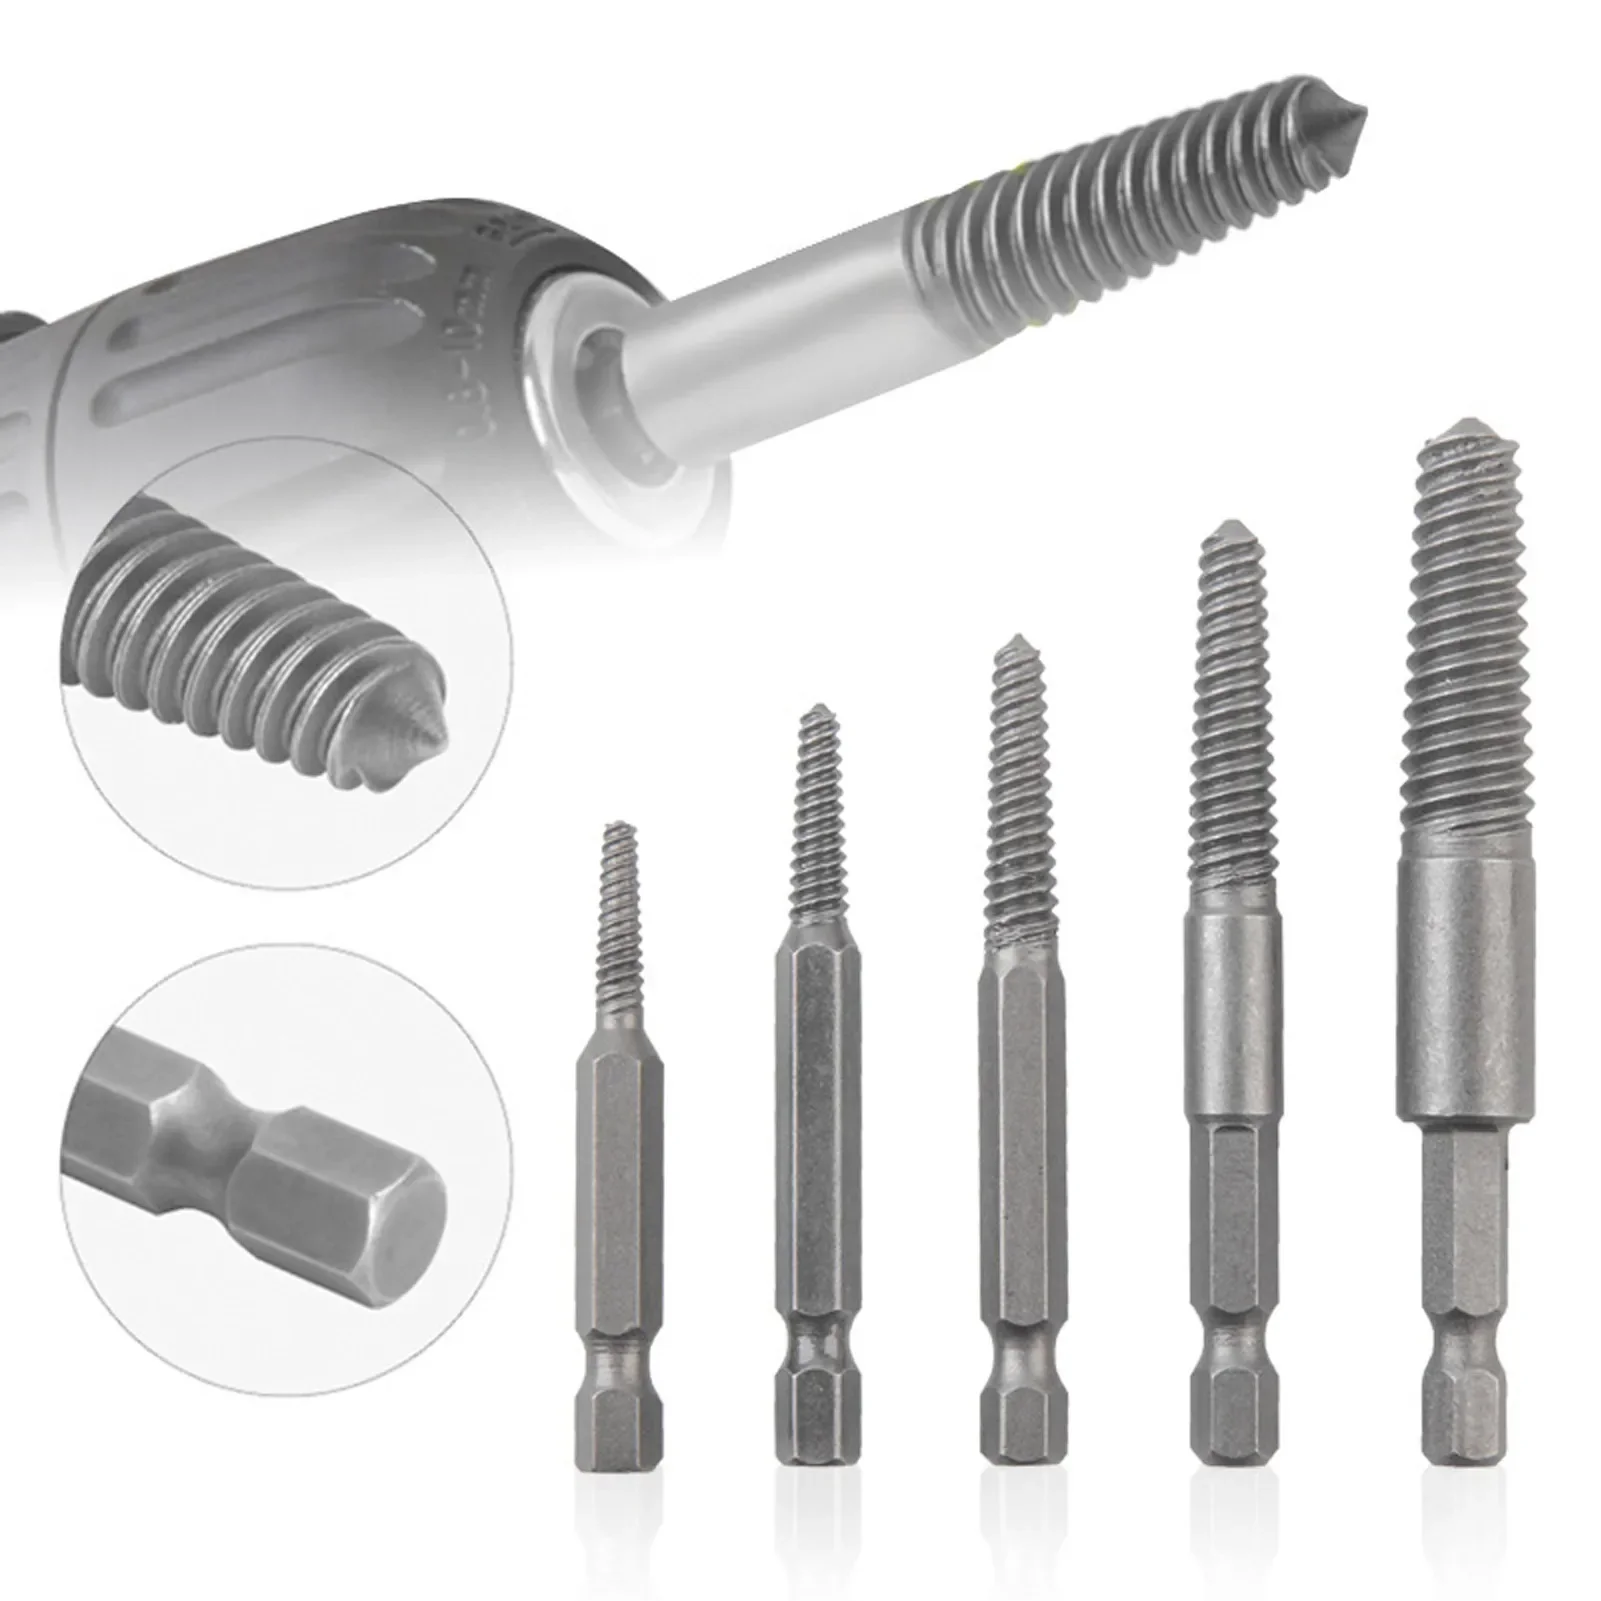 

Extractor Screw Set 6Pcs Kit Extractor Screw Damaged Tool Remover Screw Stripped Sets Remover Bolt Broken Set Drill Bit For Men